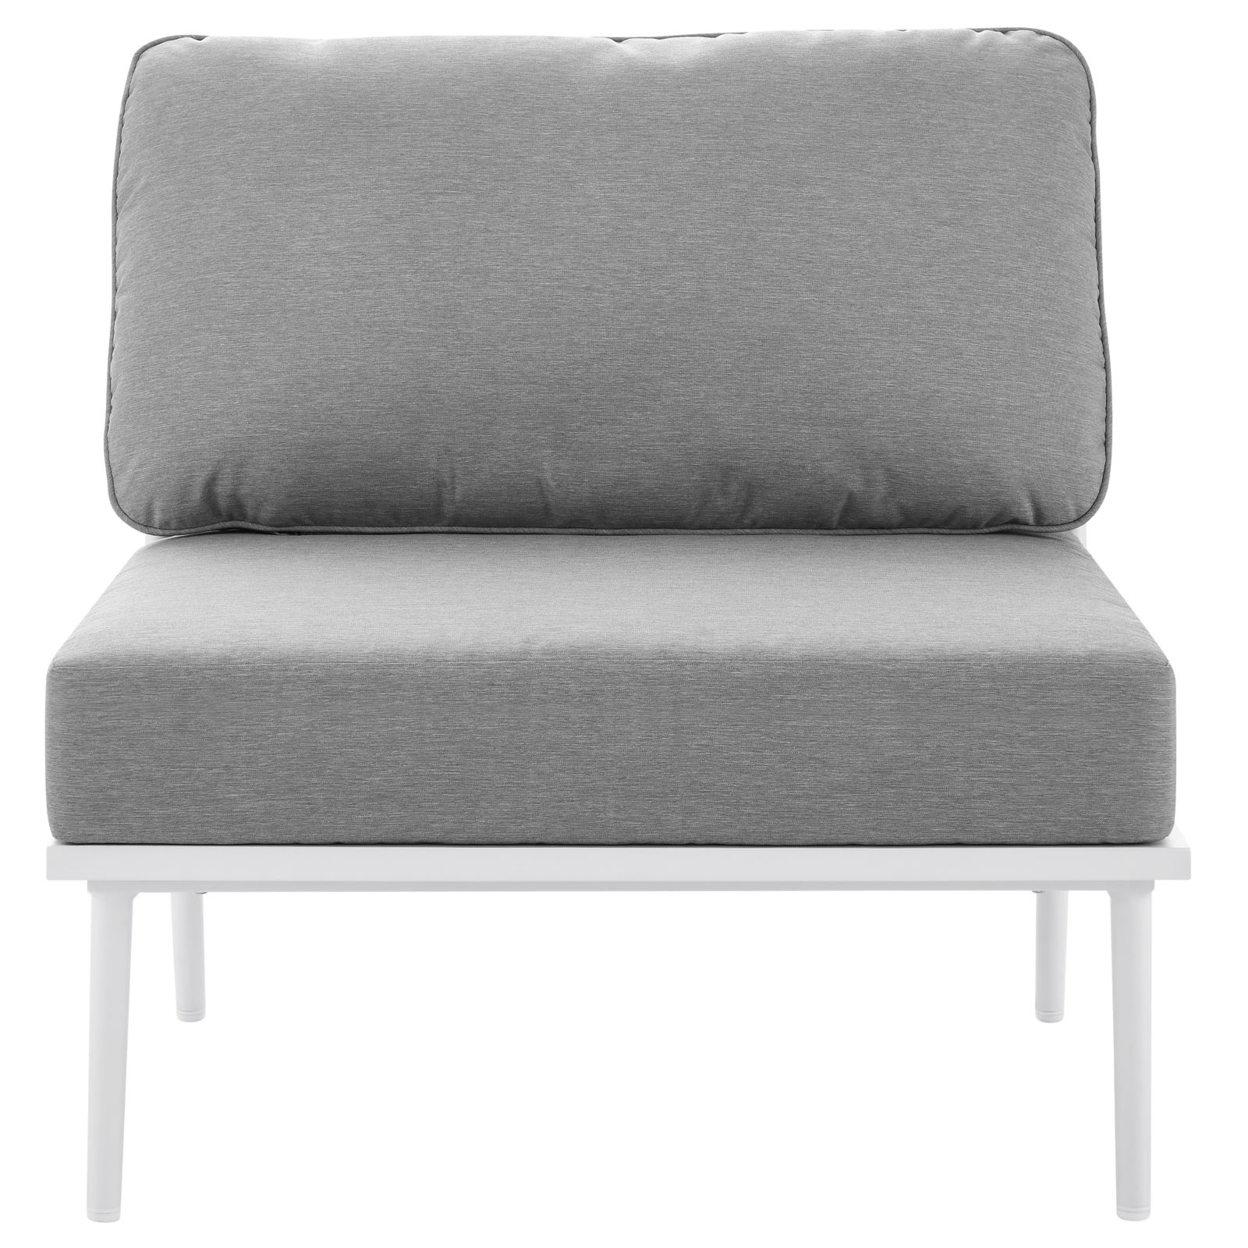 Modway Stance Modern Fabric & Aluminum Outdoor Armless Armchair in Gray - image 5 of 7